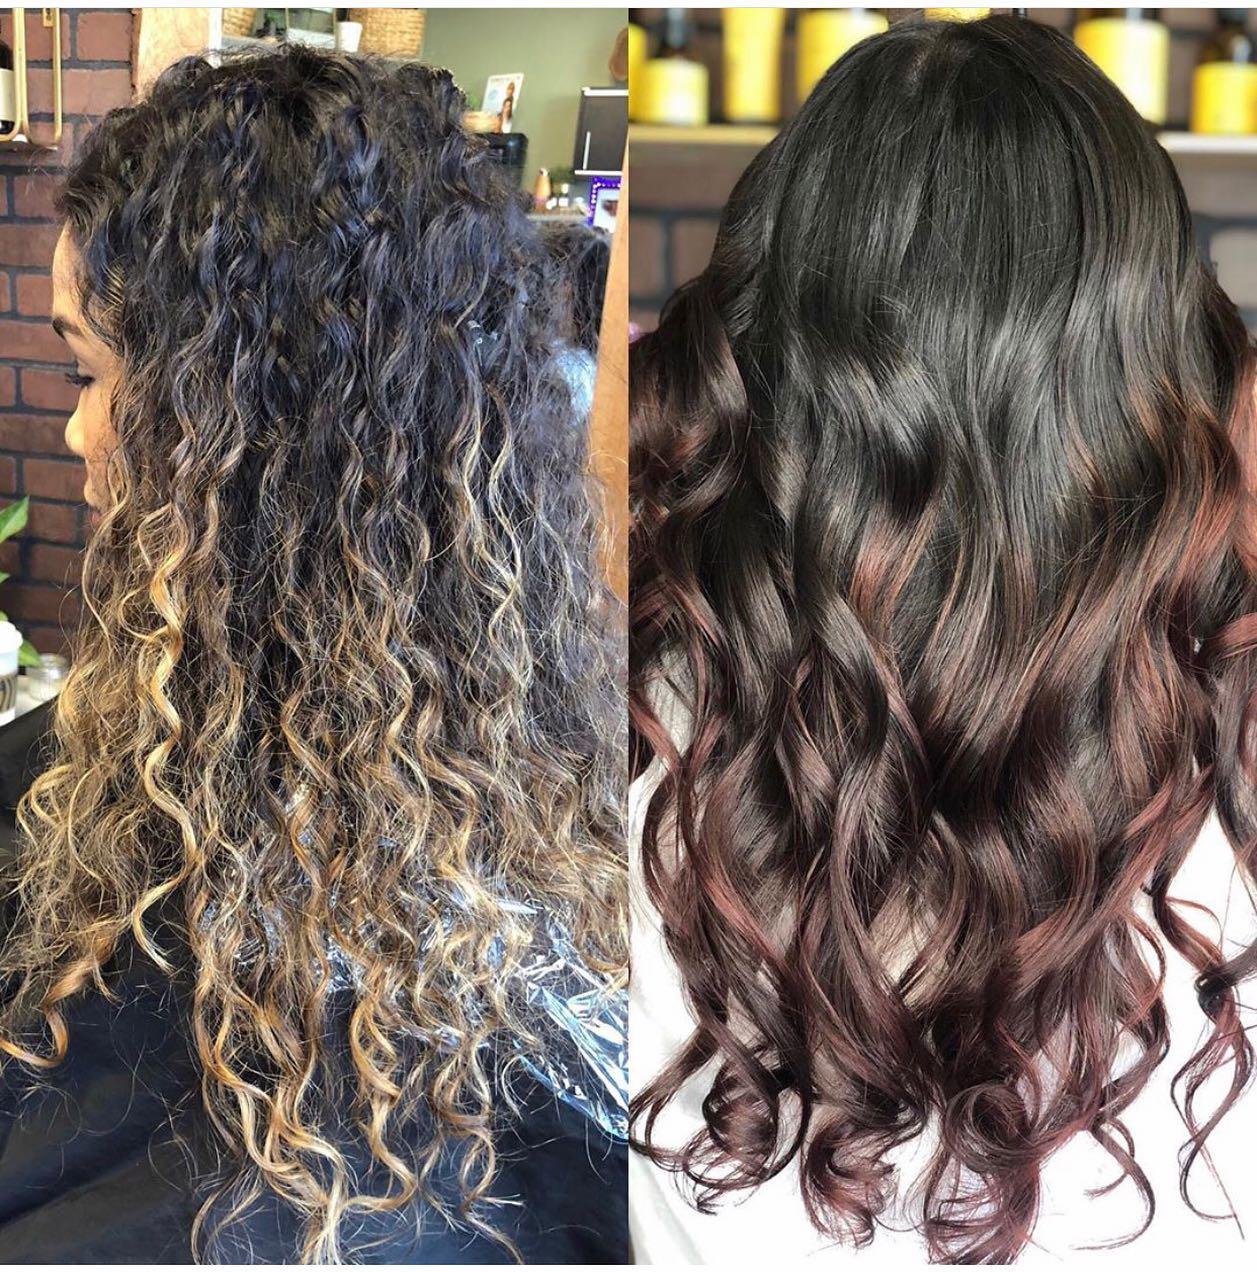 Hair styling and coloring before and after.